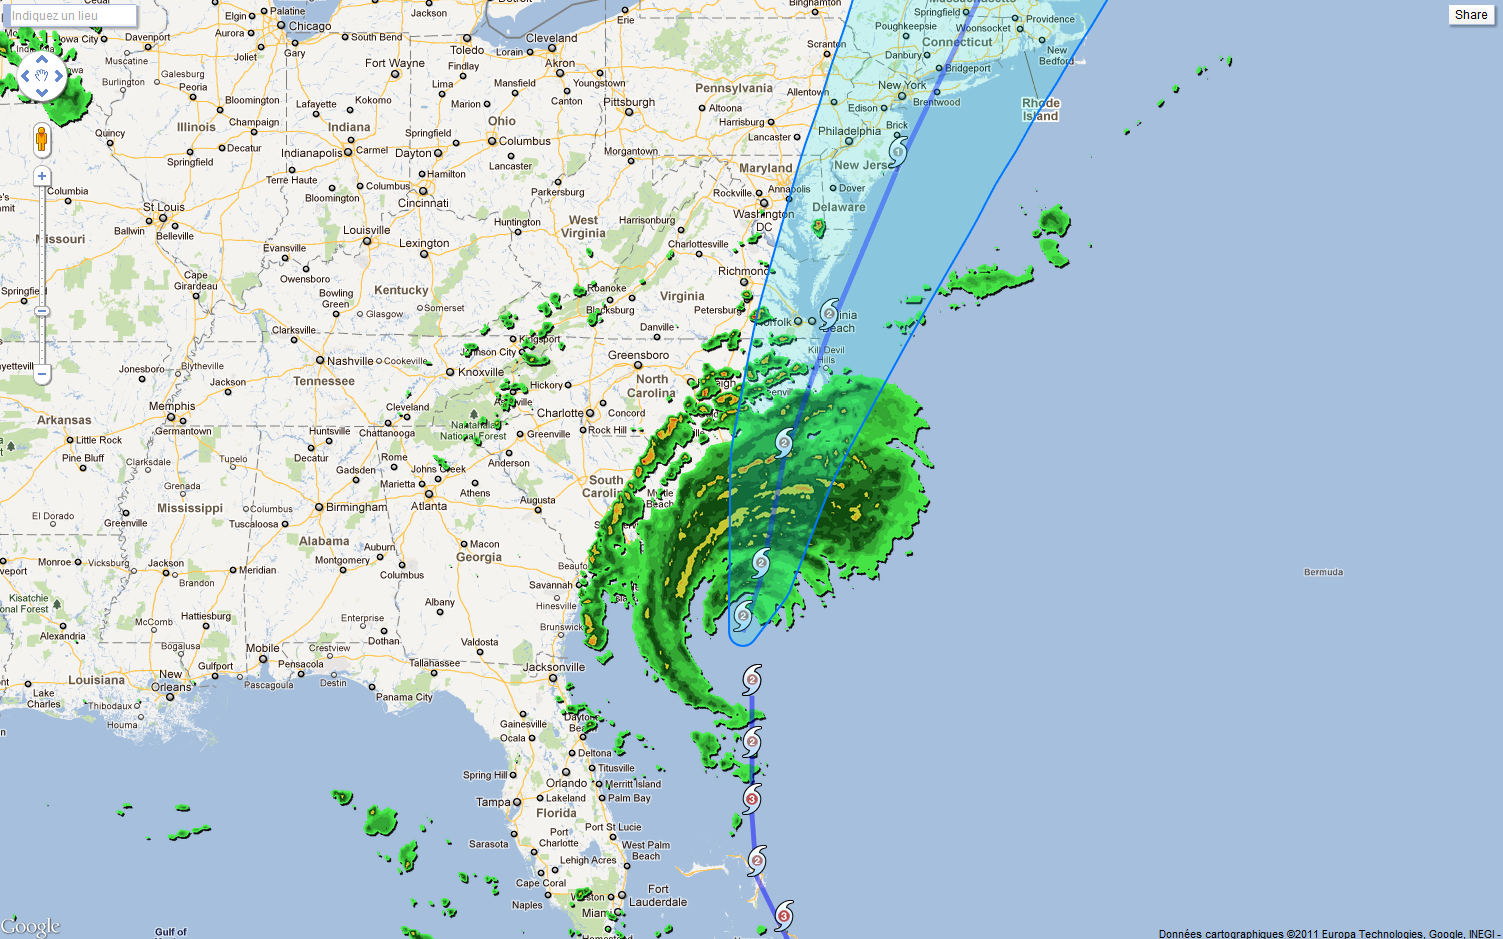 Following Hurricane Irene in New York with Google Maps in real time de F1JXQ